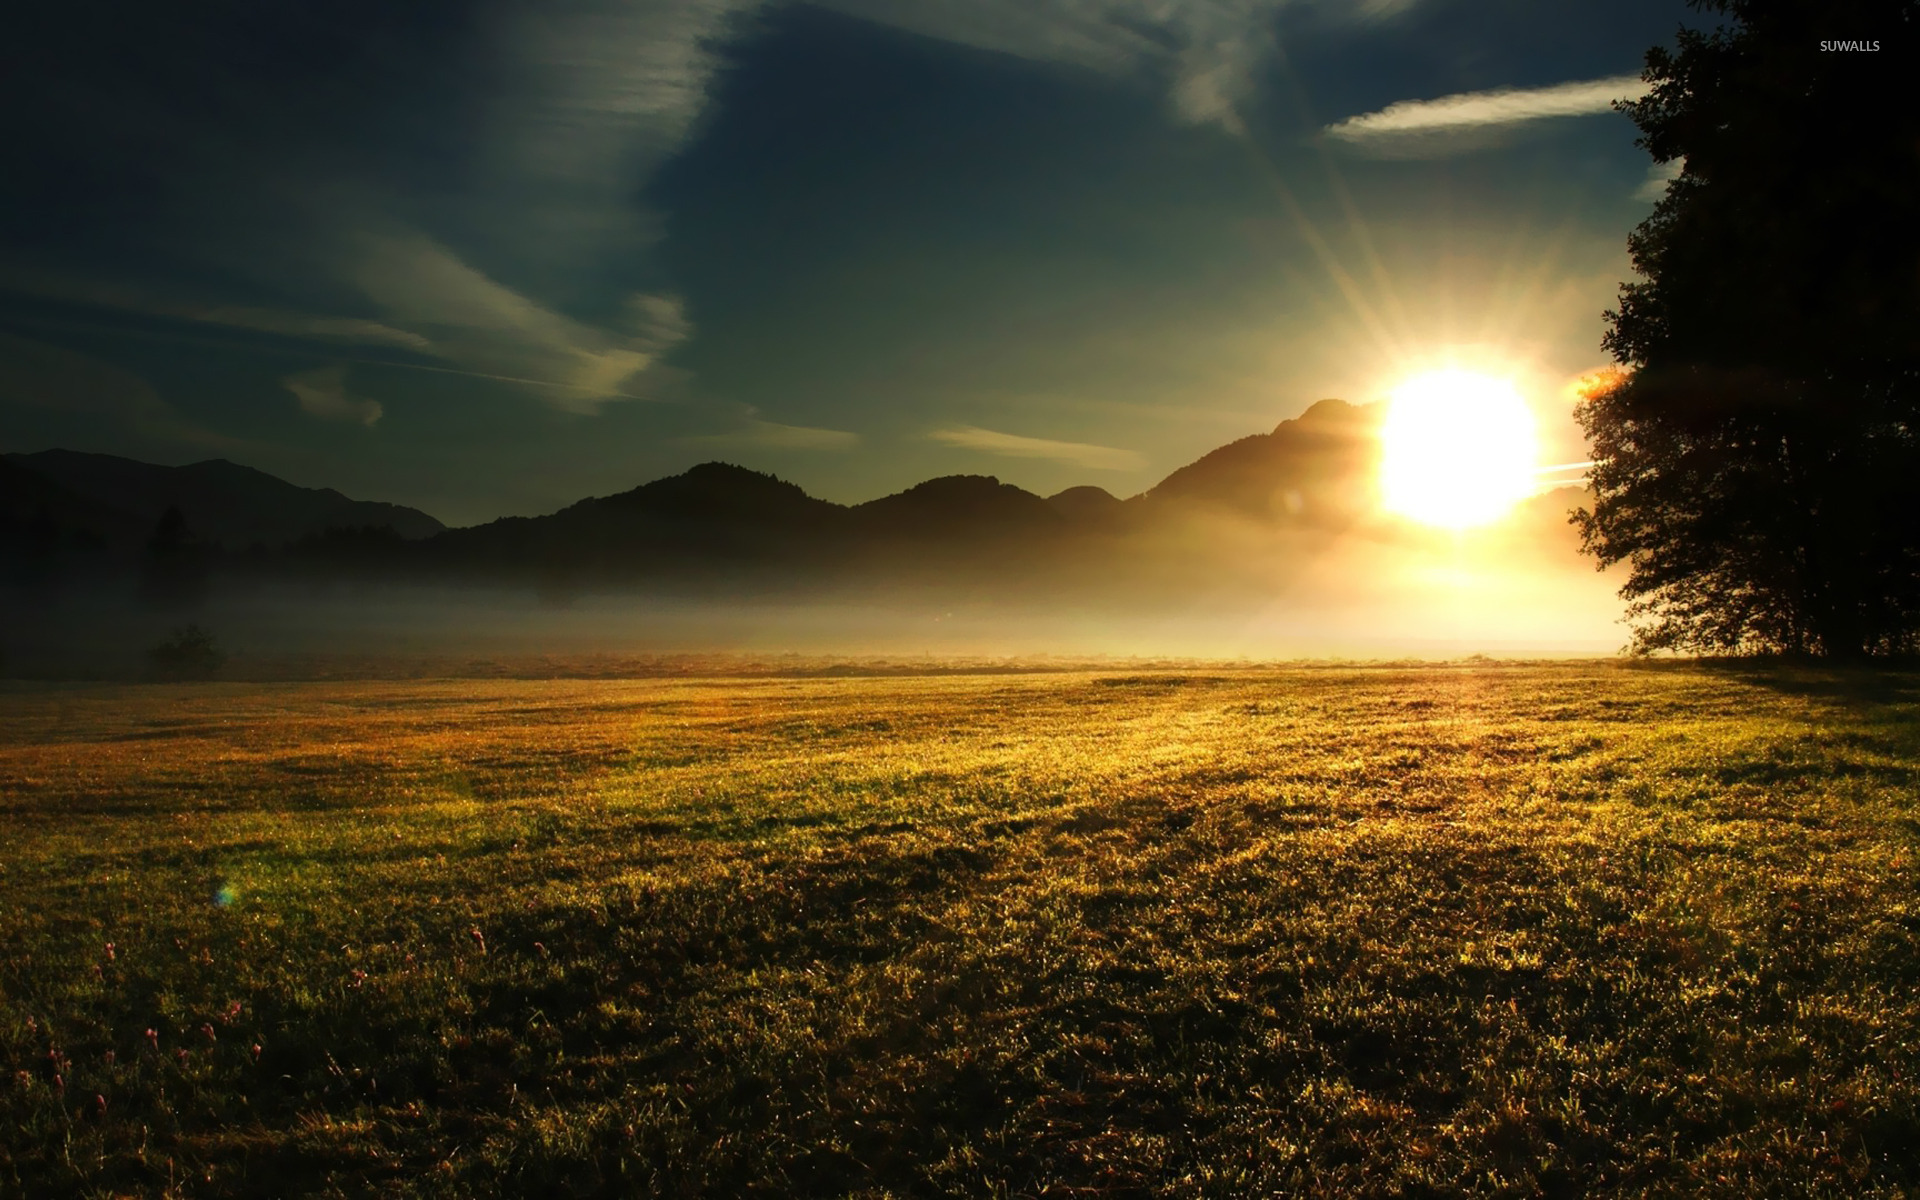 Sunrise over the Mountains wallpaper - Nature wallpapers - #14501